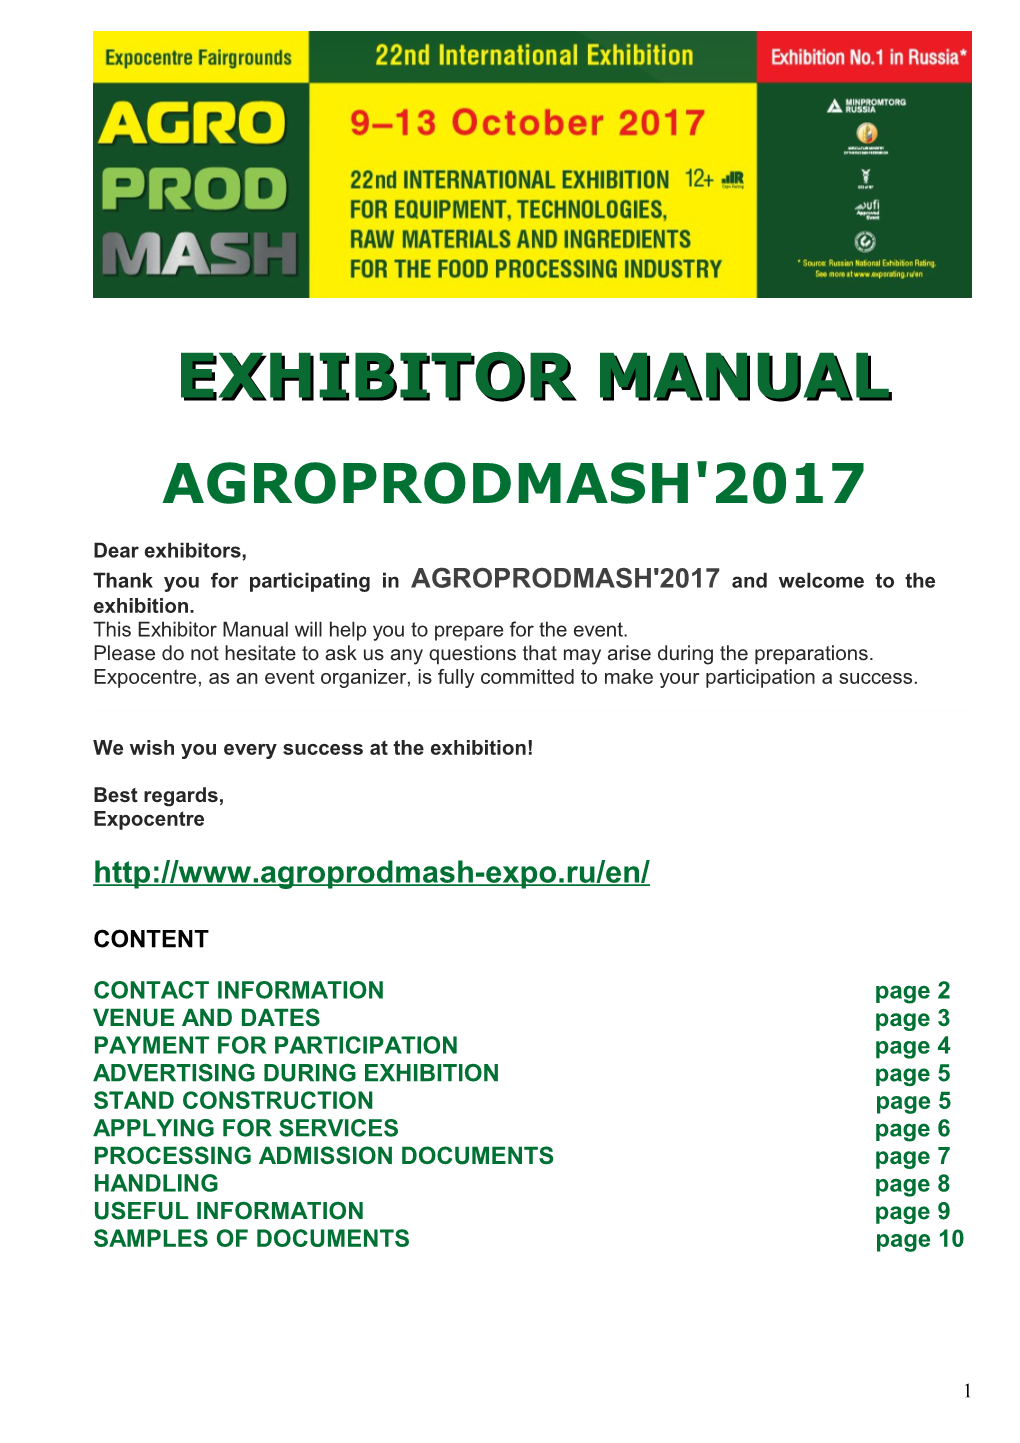 Thank You for Participating in AGROPRODMASH'2017and Welcome to the Exhibition